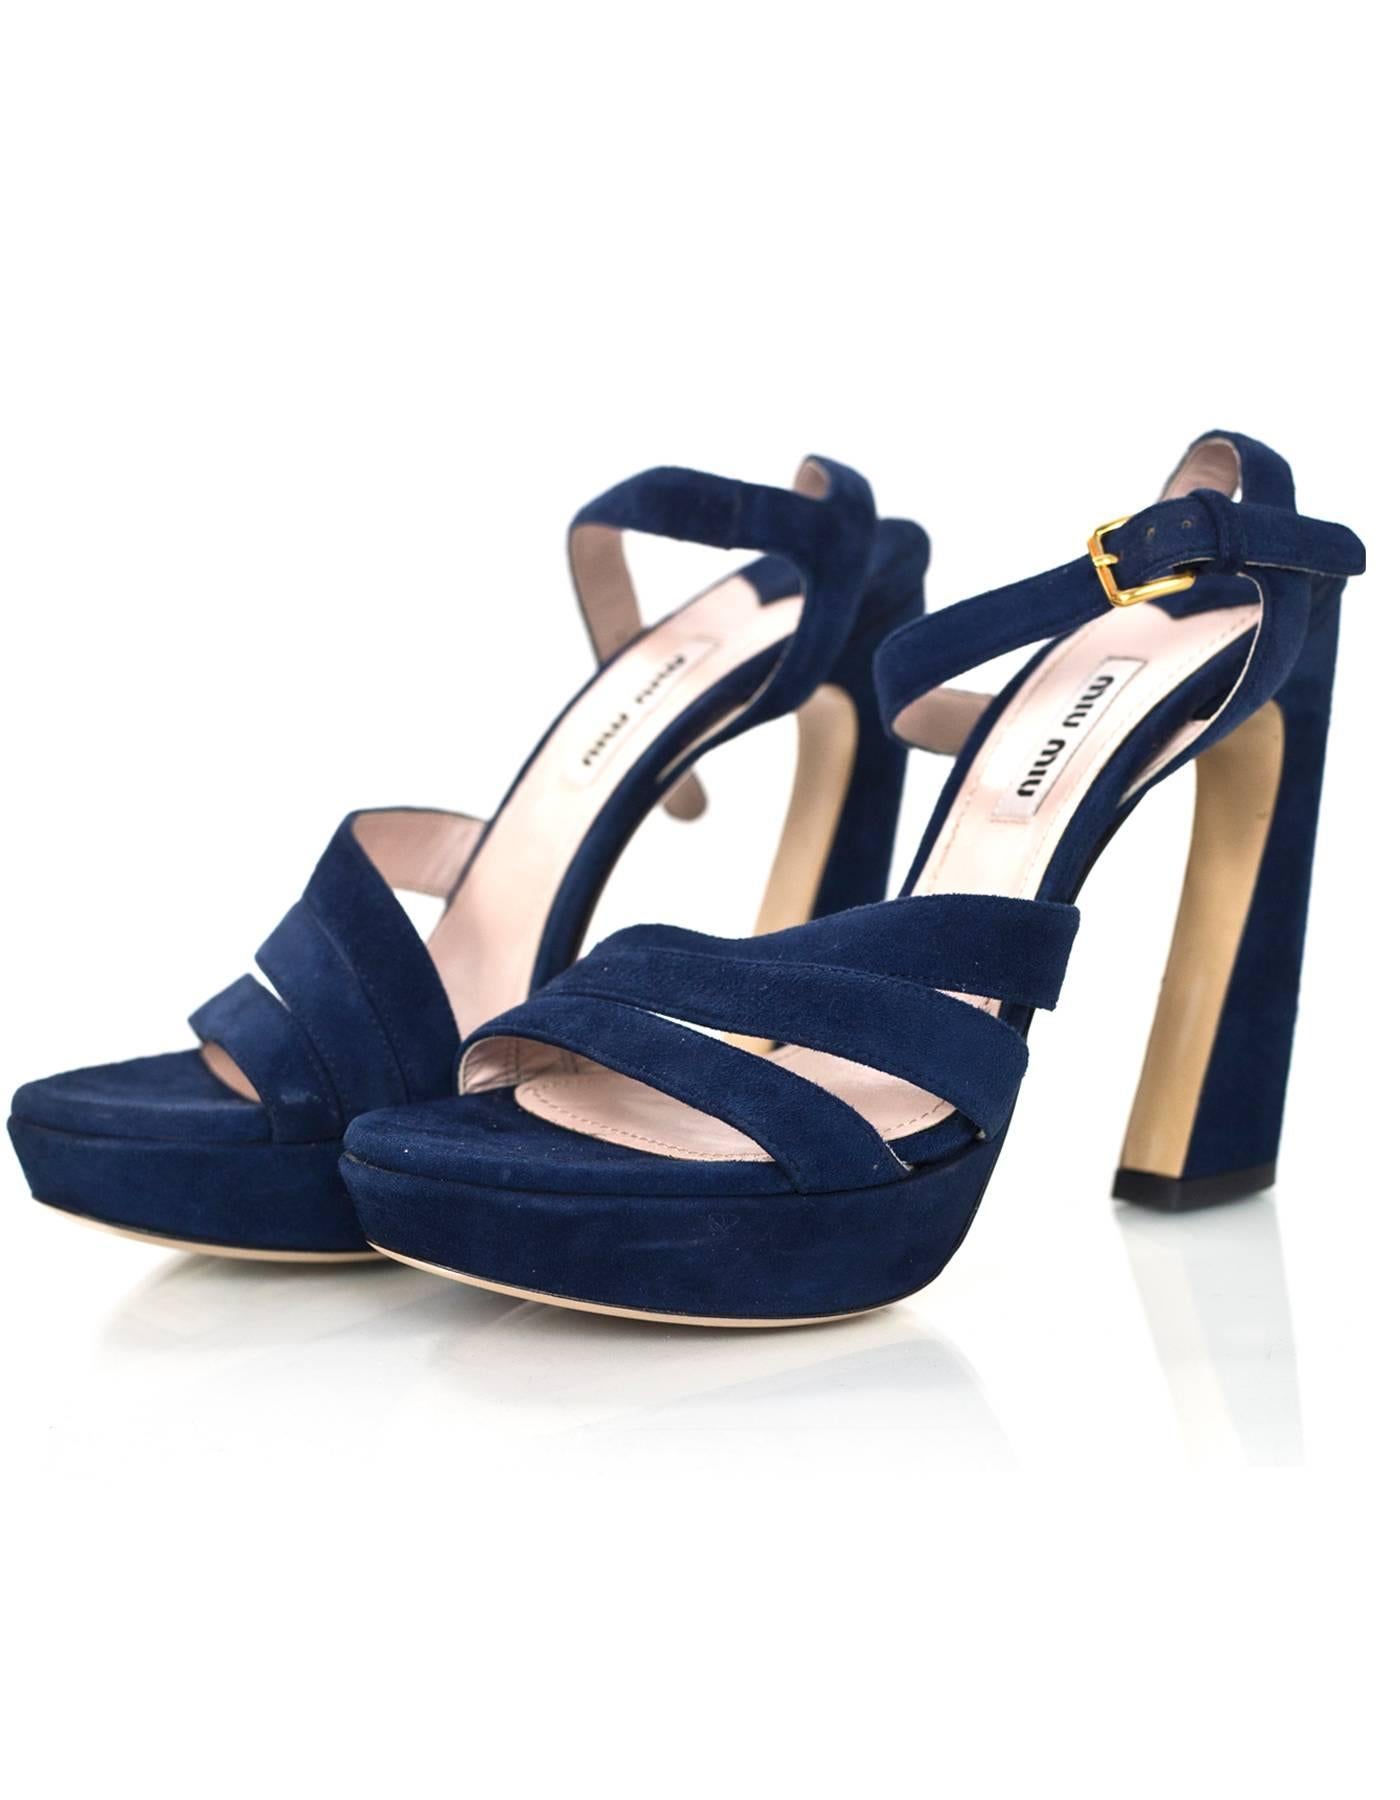 Miu Miu Blue Suede Sandals Sz 36.5 NEW

Made In: Italy
Color: Blue
Materials: Suede
Closure/Opening: Buckle closure at ankle
Sole Stamp: Miu Miu Made in Italy 36.5
Retail Price: $675 + tax
Overall Condition: Excellent pre-owned condition - new, no